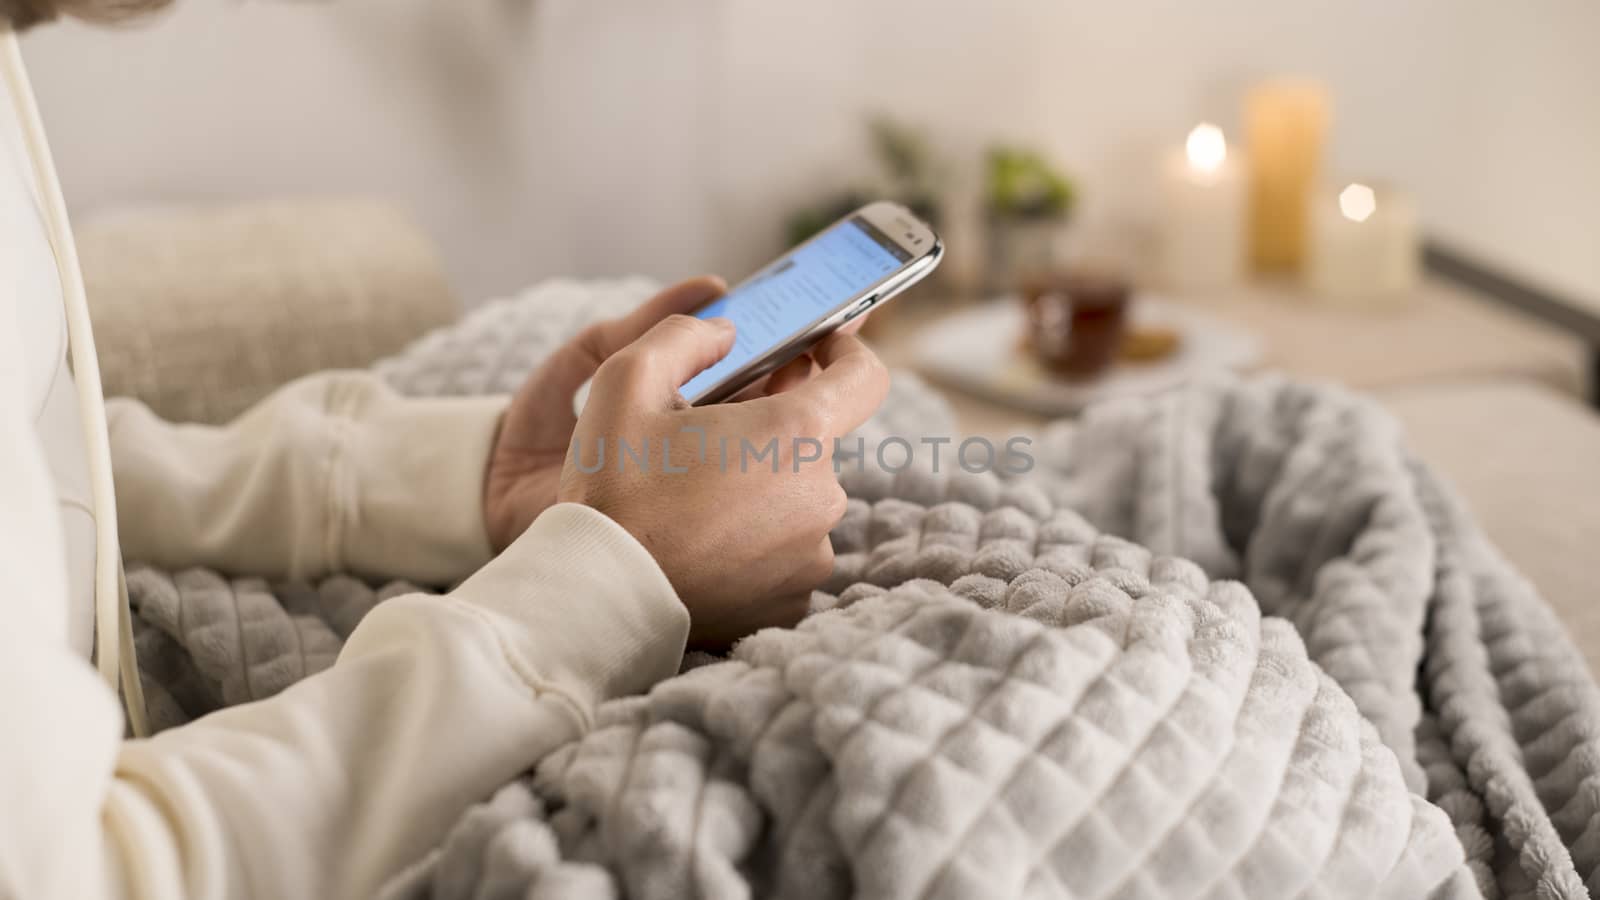 Relaxation concept: woman sitting on the sofa with a blanket on her legs using her smartphone while sliding her fingers across the screen by robbyfontanesi